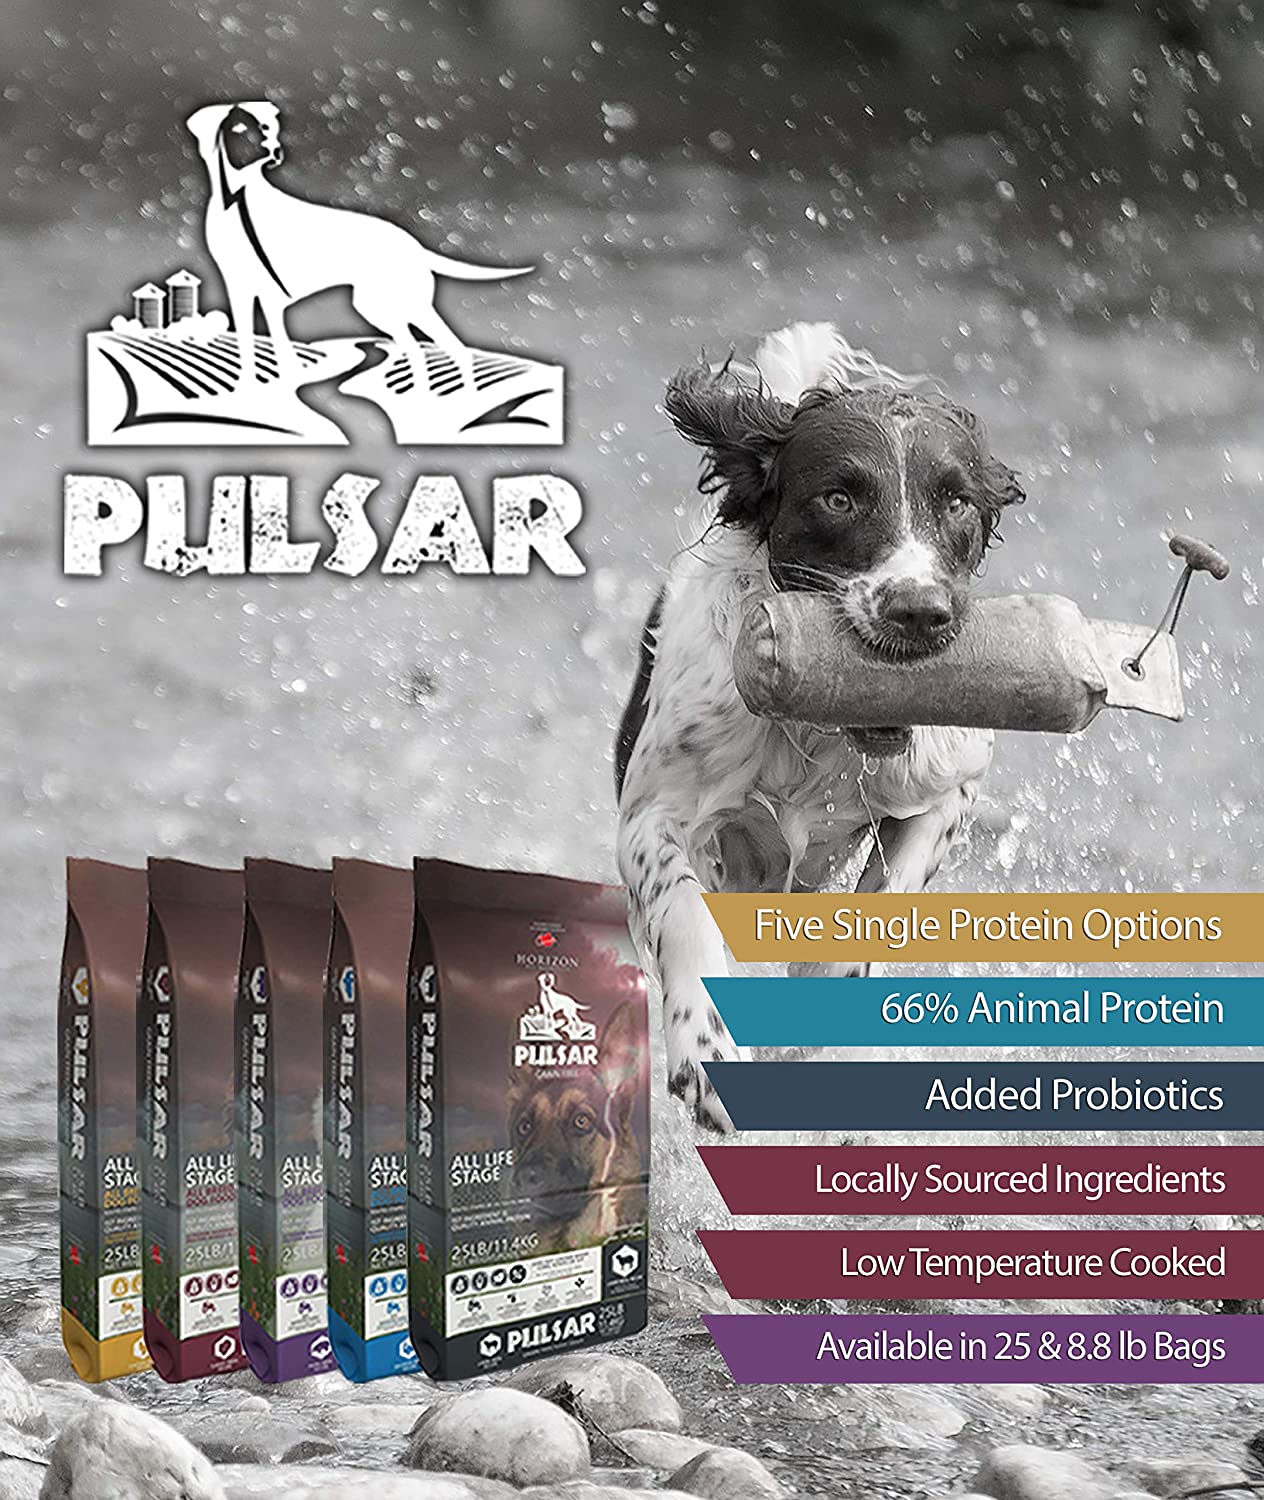 Pulsar All Life Stage, All Breed Dog Food, Grain-Free, Salmon Meal Recipe